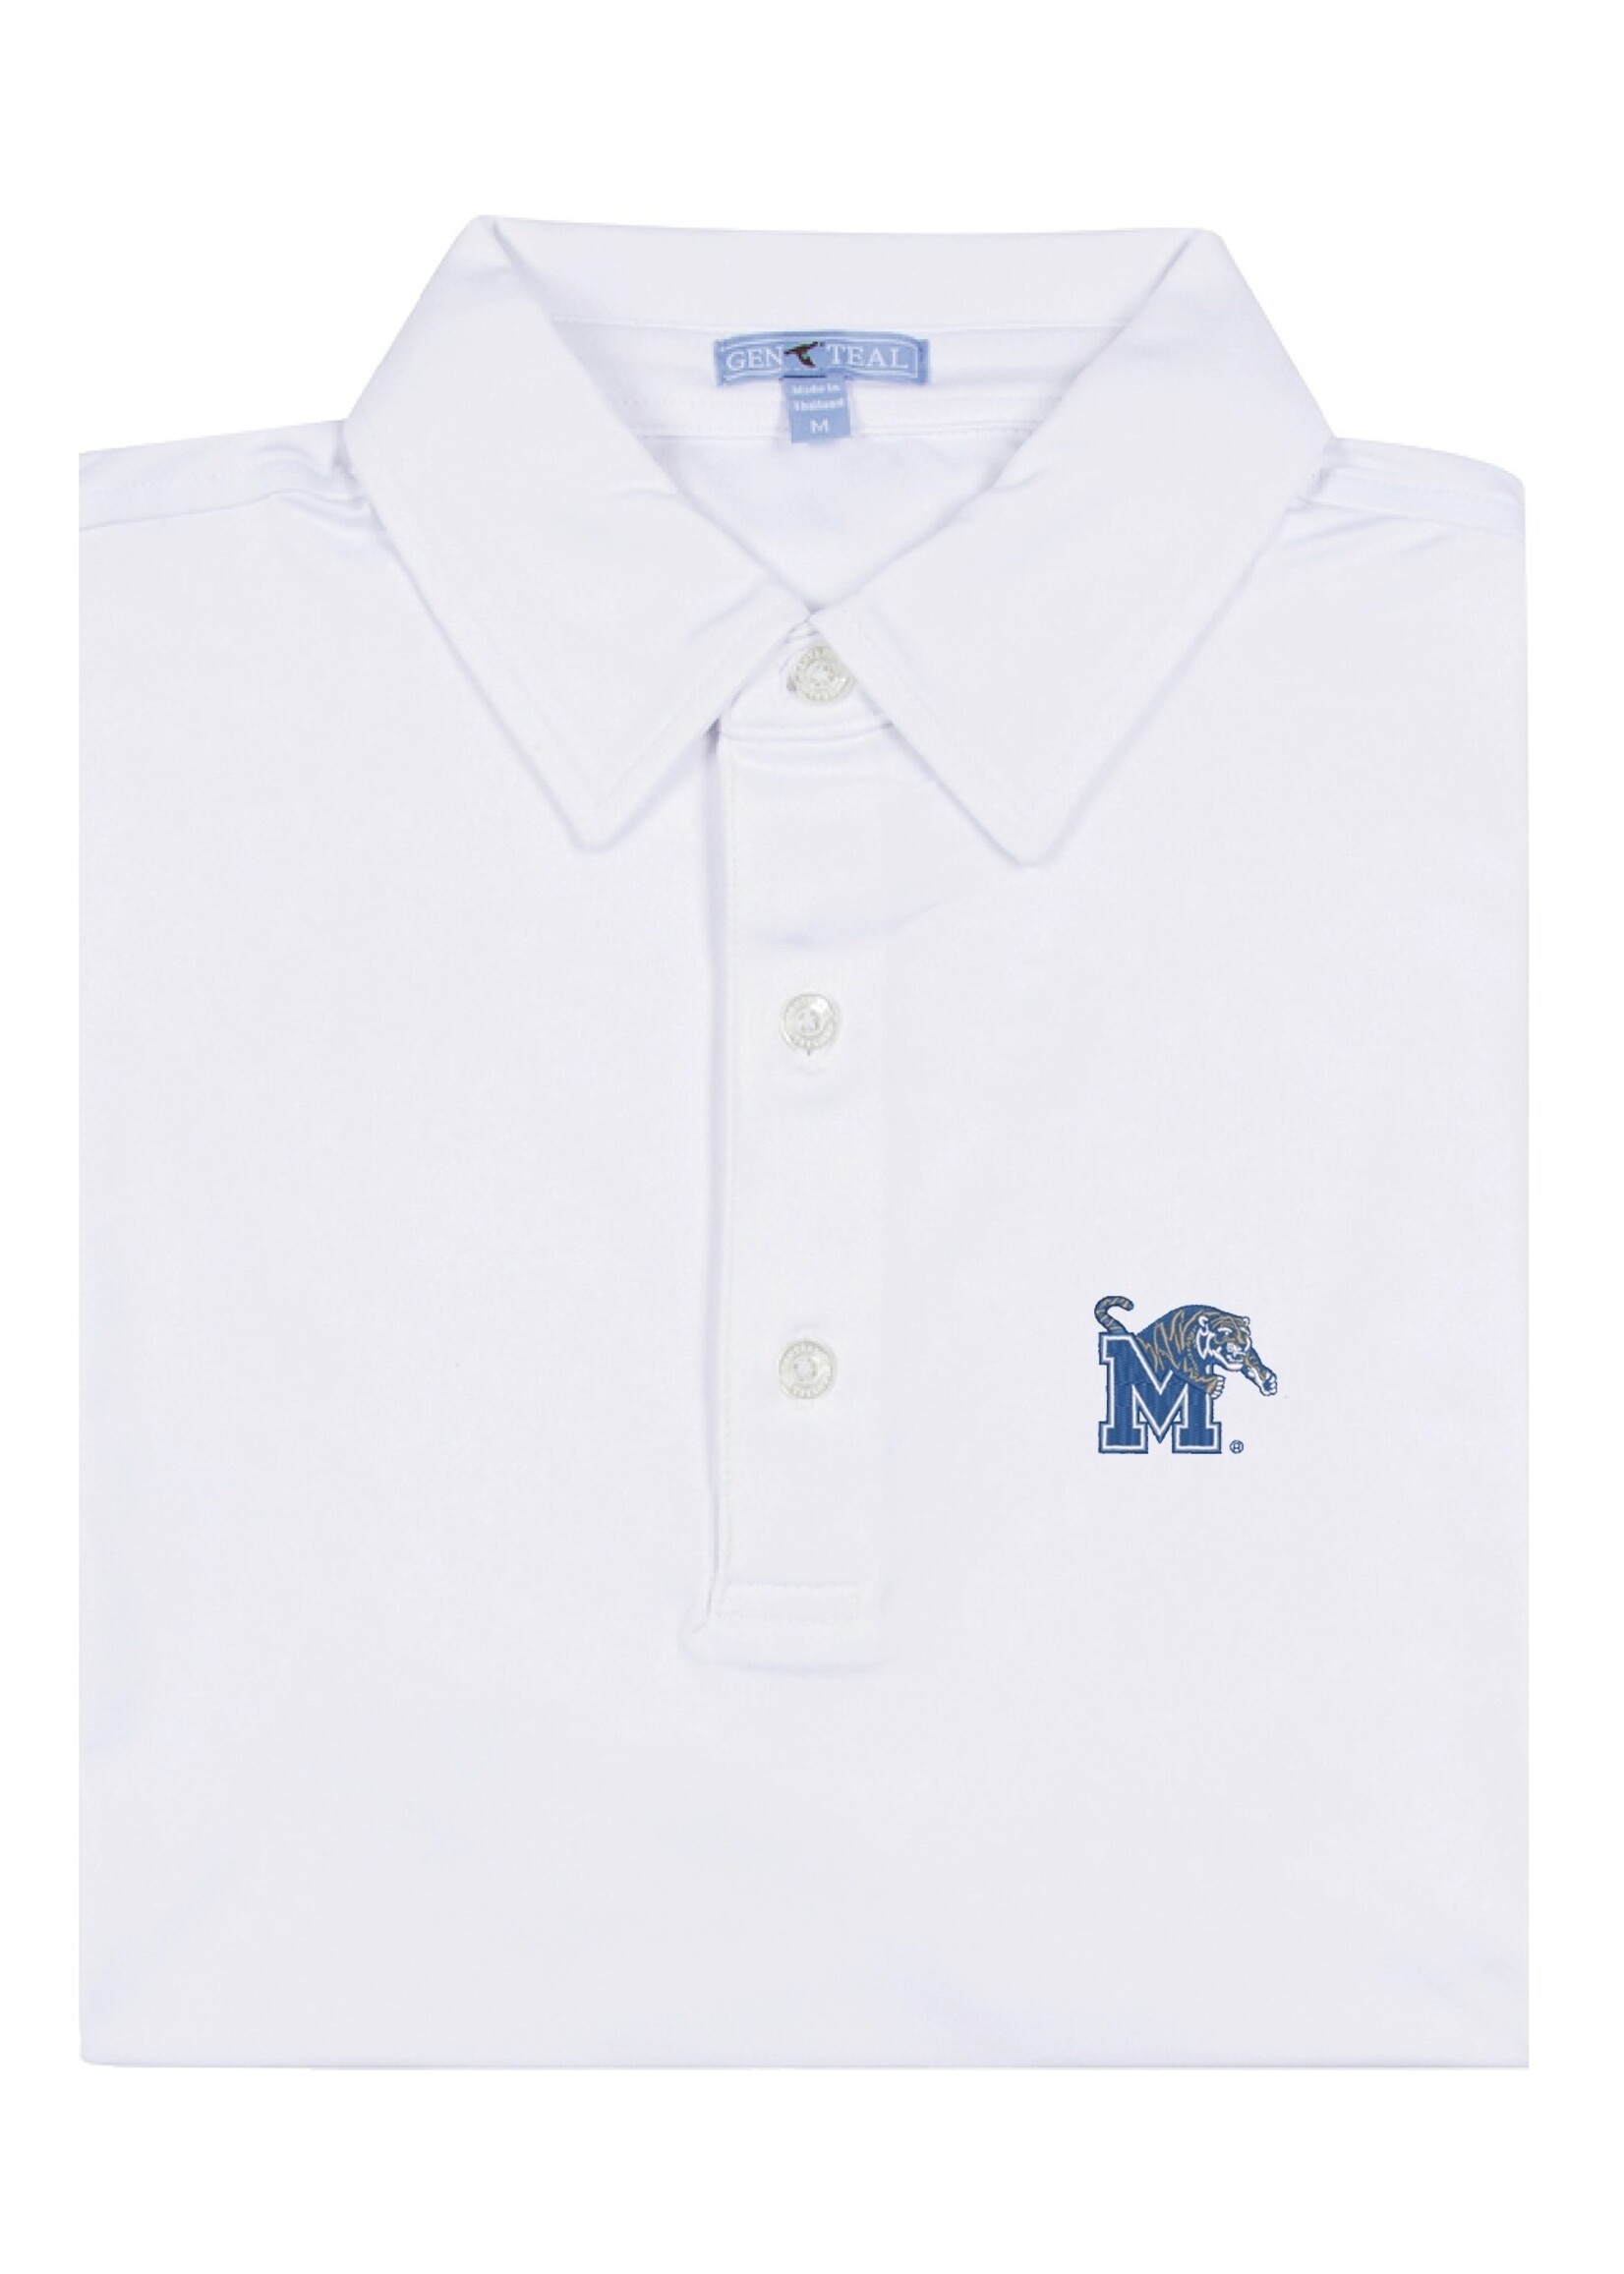 GenTeal Apparel Memphis Tigers White Performance Polo